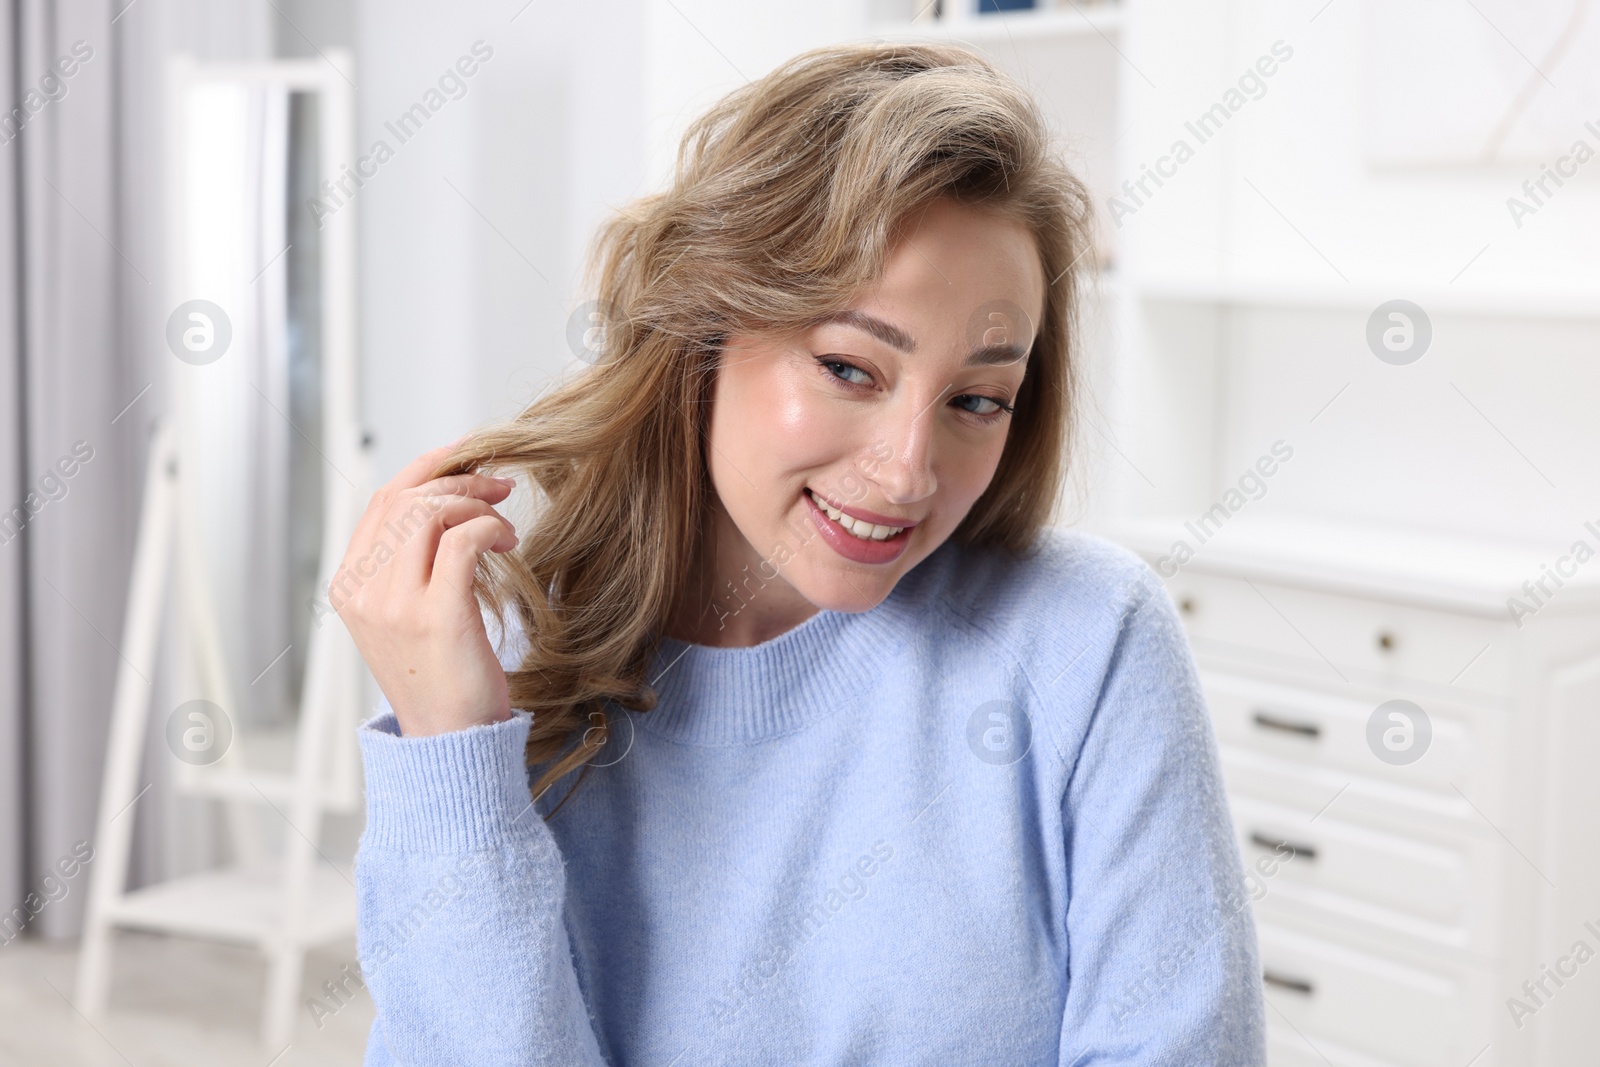 Photo of Portrait of smiling woman with curly hair at home